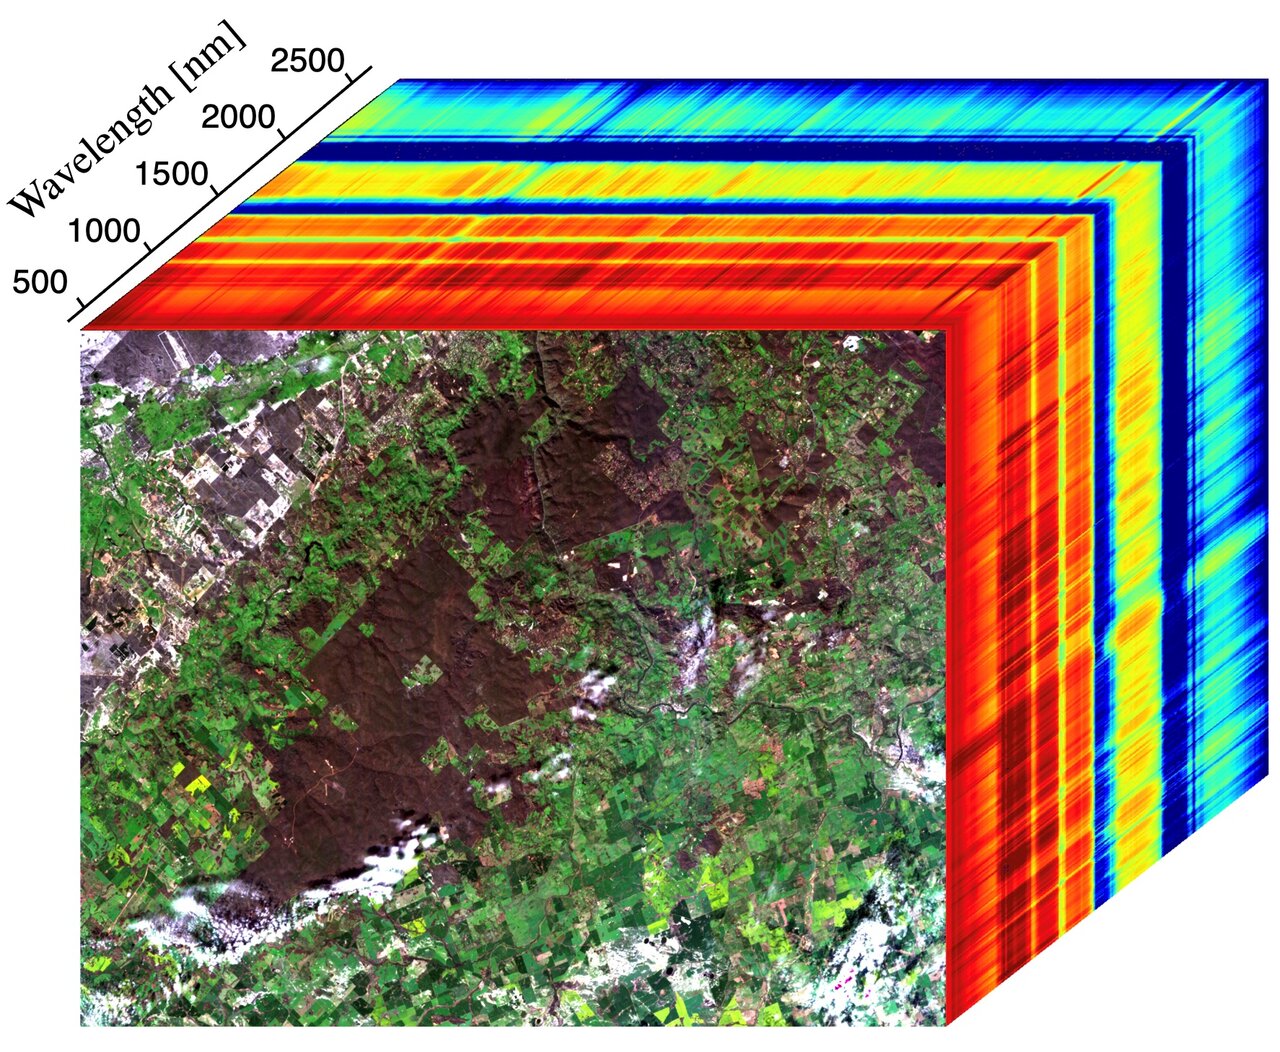 This image shows the first measurements taken by EMIT on July 27, 2022, as it passed over Western Australia. The image at the front of the cube shows a mix of materials in Western Australia, including exposed soil (brown), vegetation (dark green), agricultural fields (light green), a small river, and clouds. The rainbow colors extending through the main part of the cube are the spectral fingerprints from corresponding spots in the front image.
